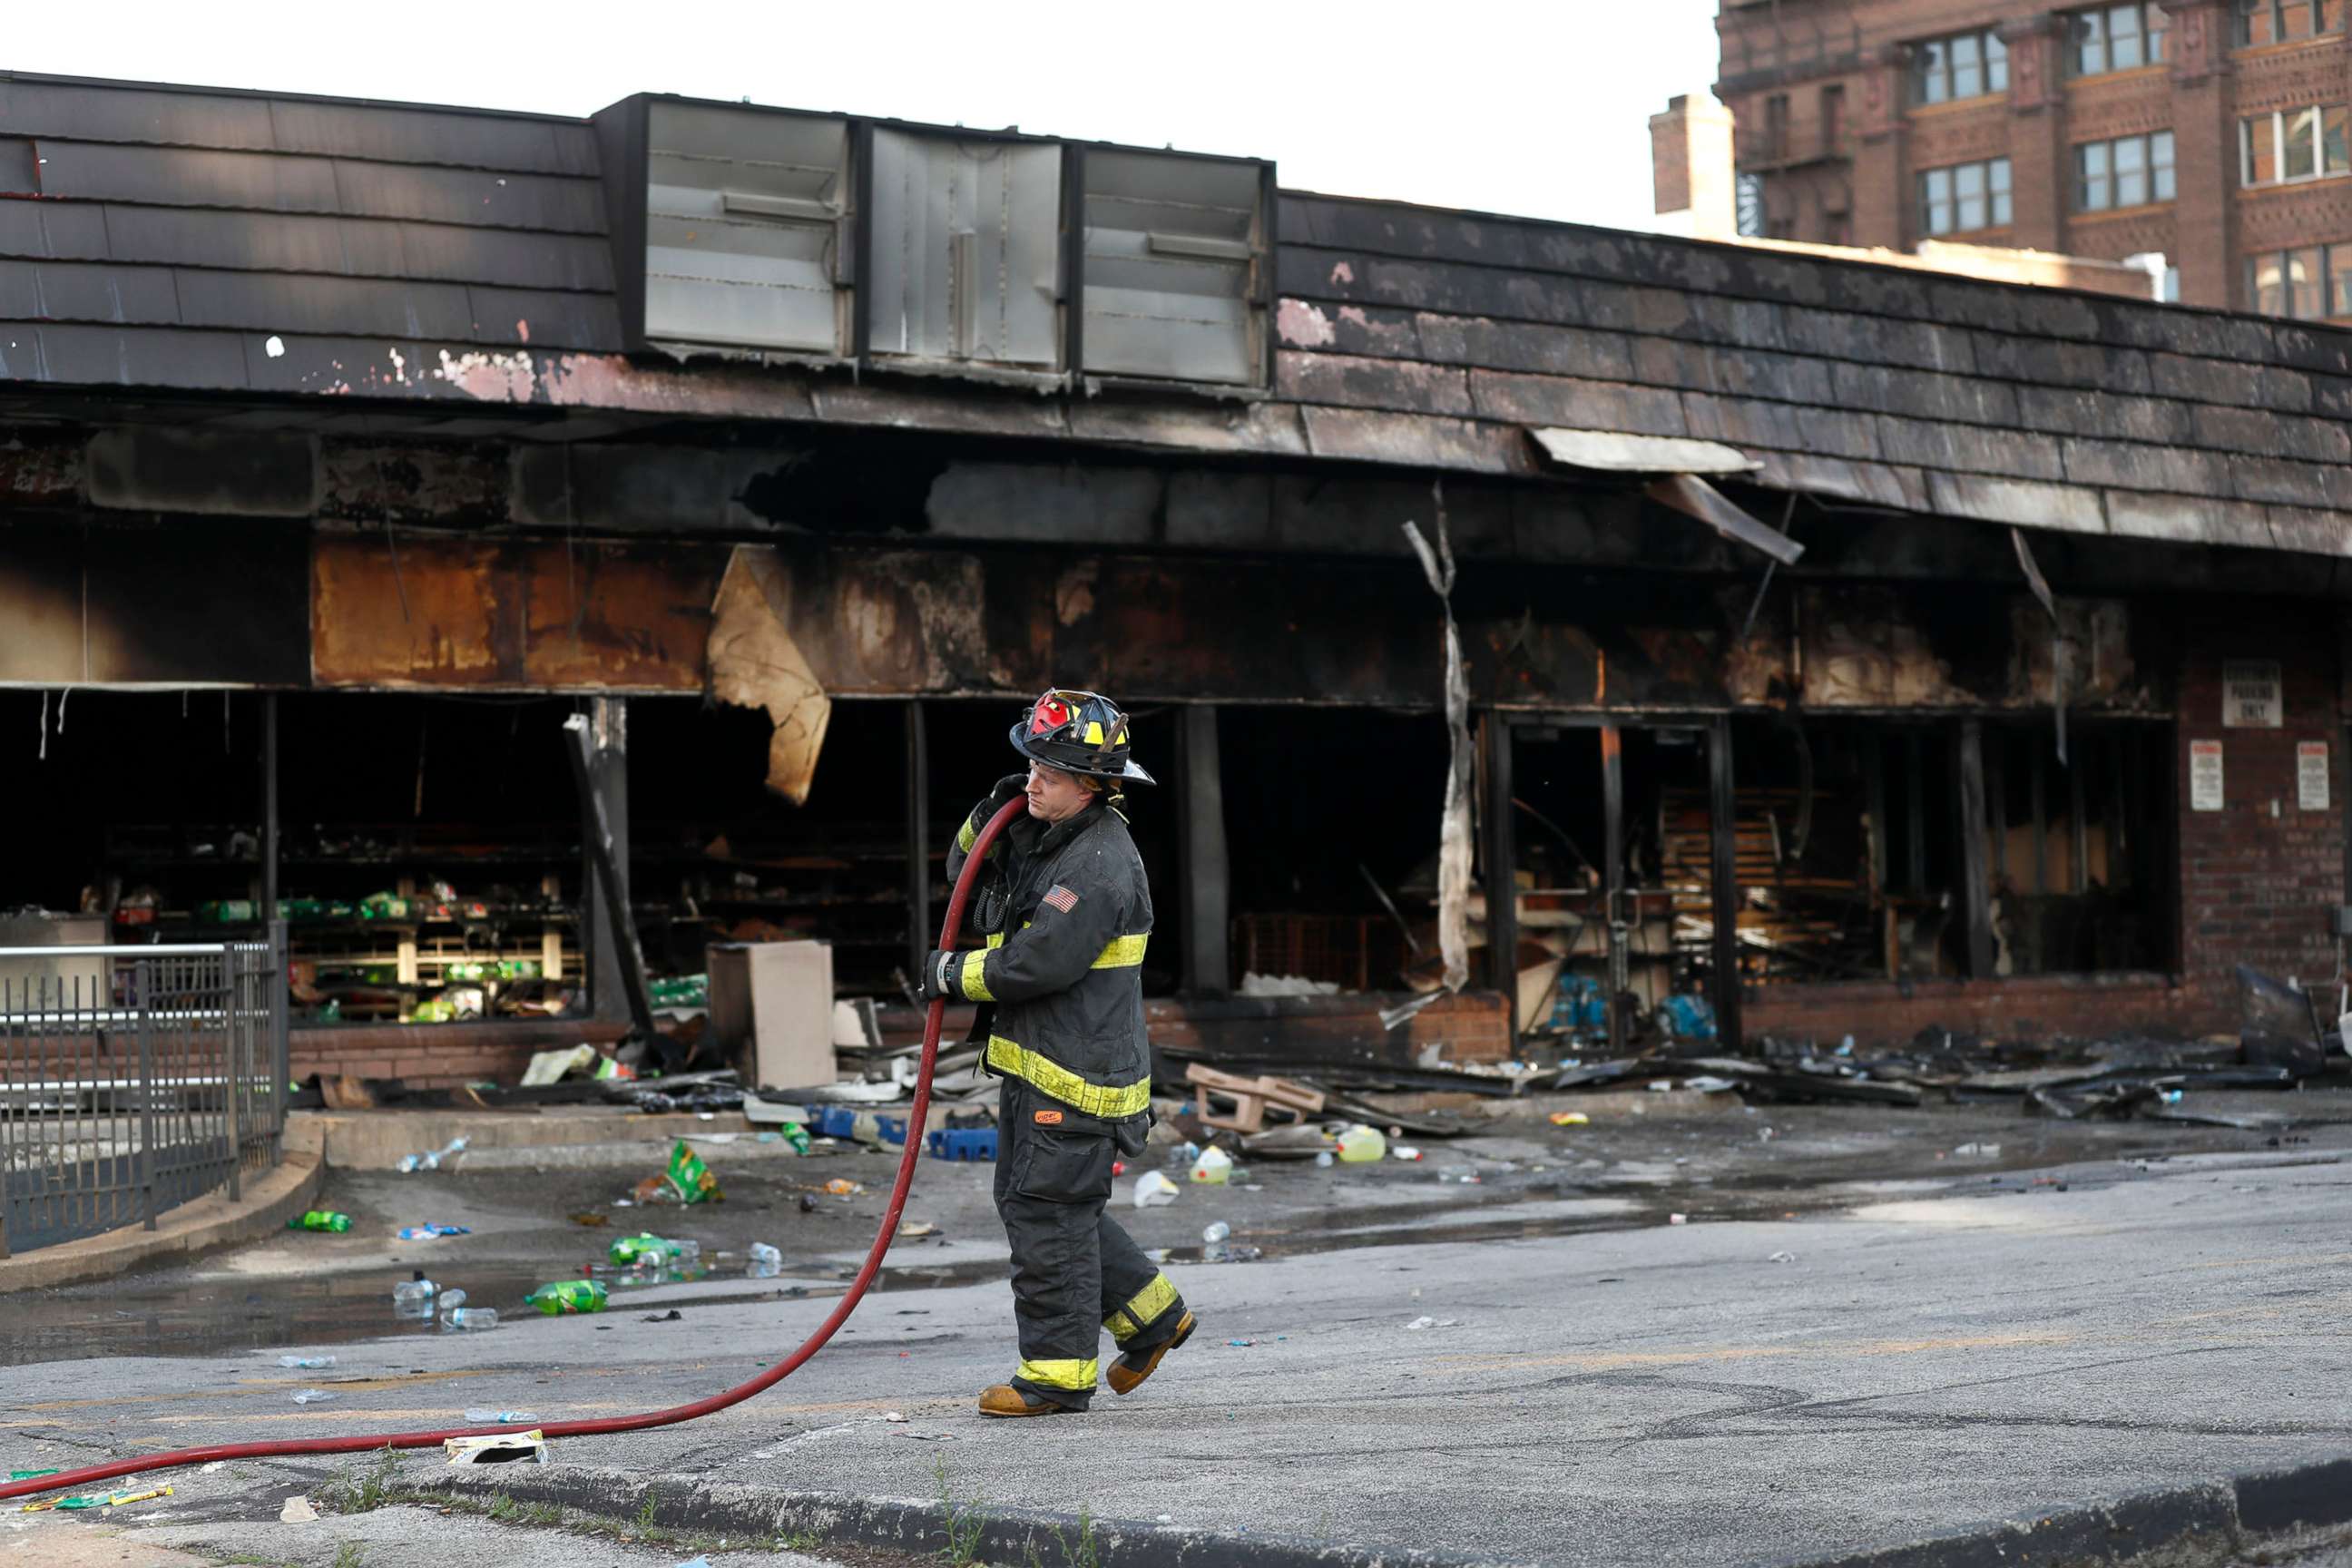 PHOTO: A member of the St. Louis Fire Department removes a hose outside a vandalized and burned convenience store, June 2, 2020, in St. Louis, the morning after protests against the death of George Floyd.